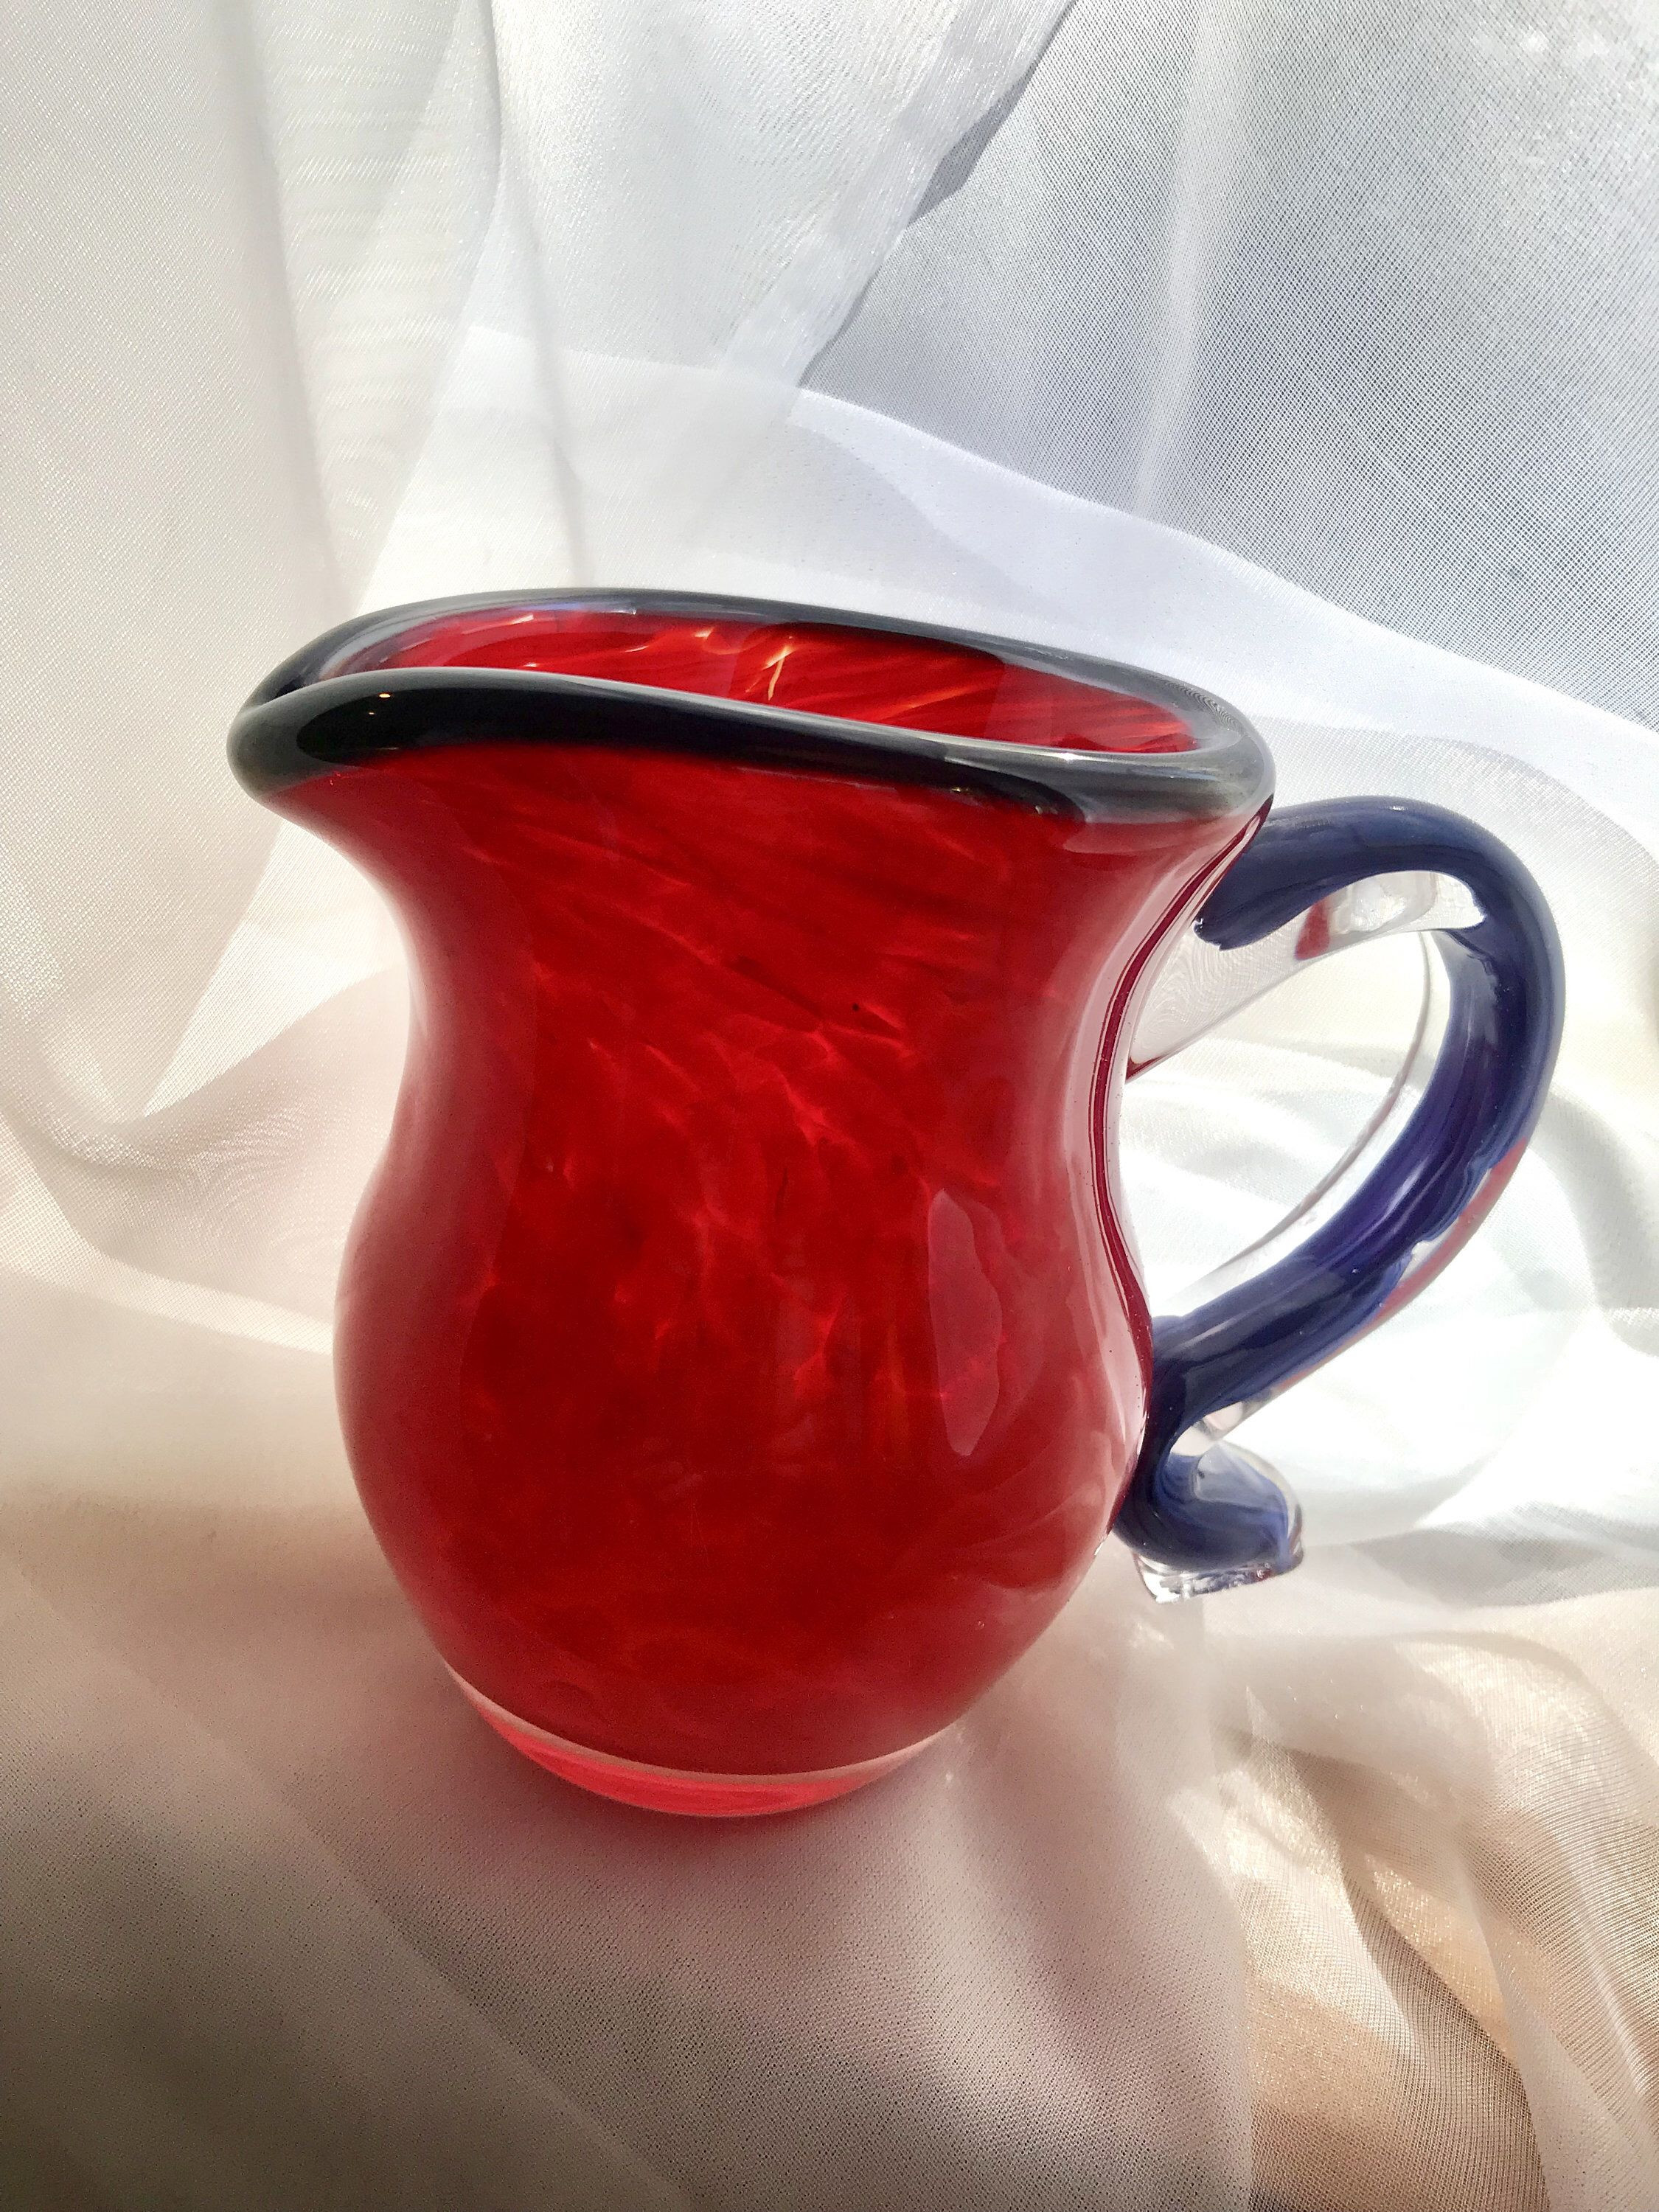 15 Lovable Hand Blown Glass Vases Bowls 2024 free download hand blown glass vases bowls of blown glass pitcher vase hand blown red vase ooak gifts for her with regard to blown glass pitcher vase hand blown red vase ooak gifts for her blown glass pin